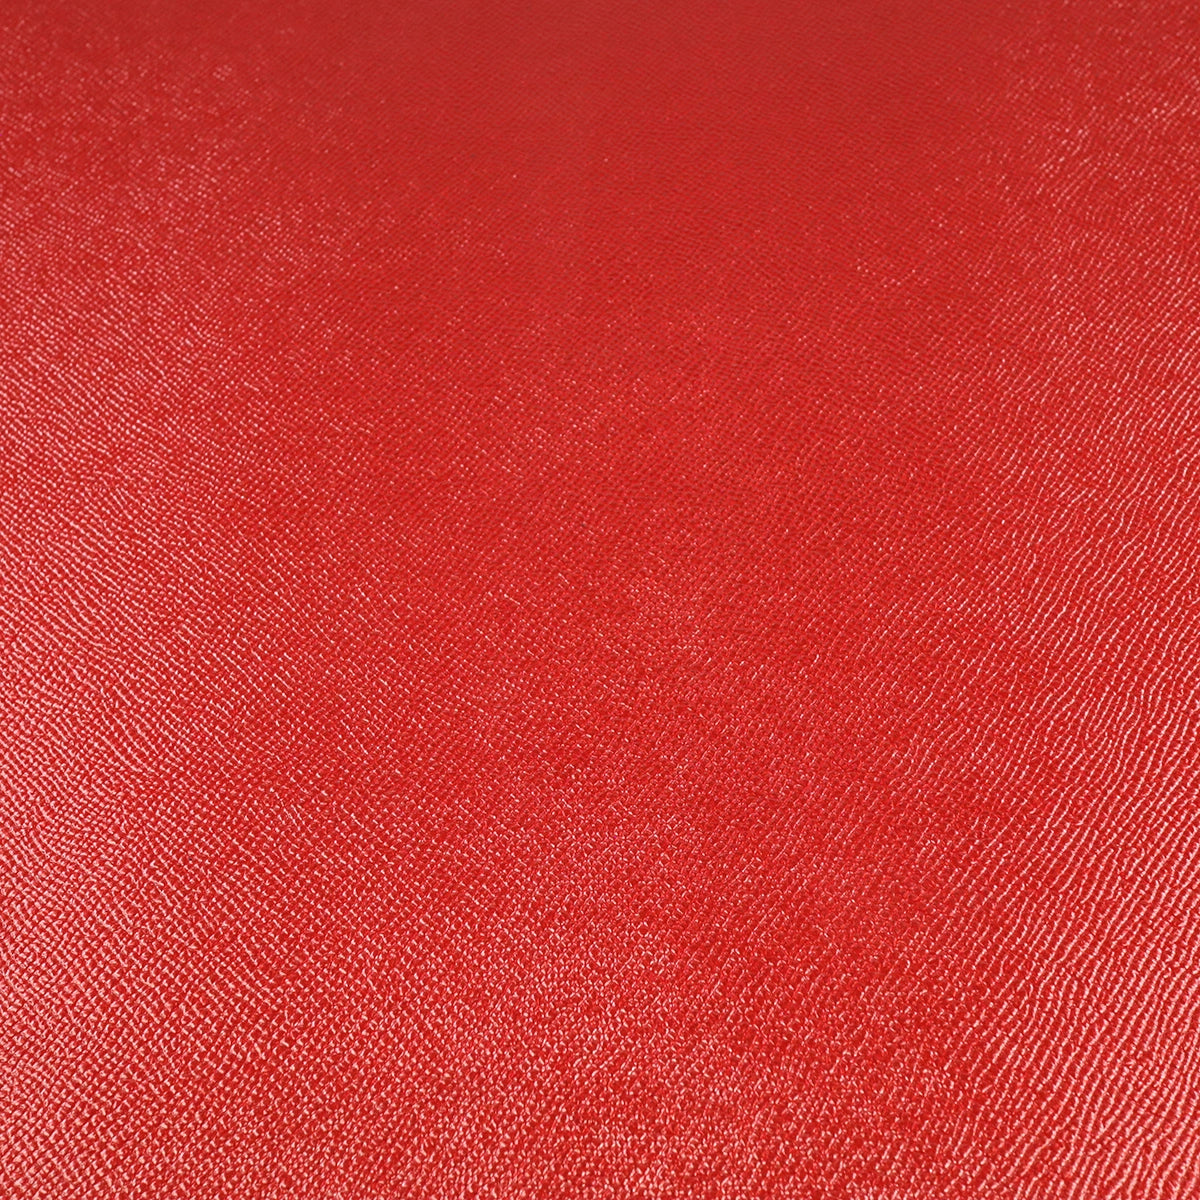 Red Saffiano Style Leather